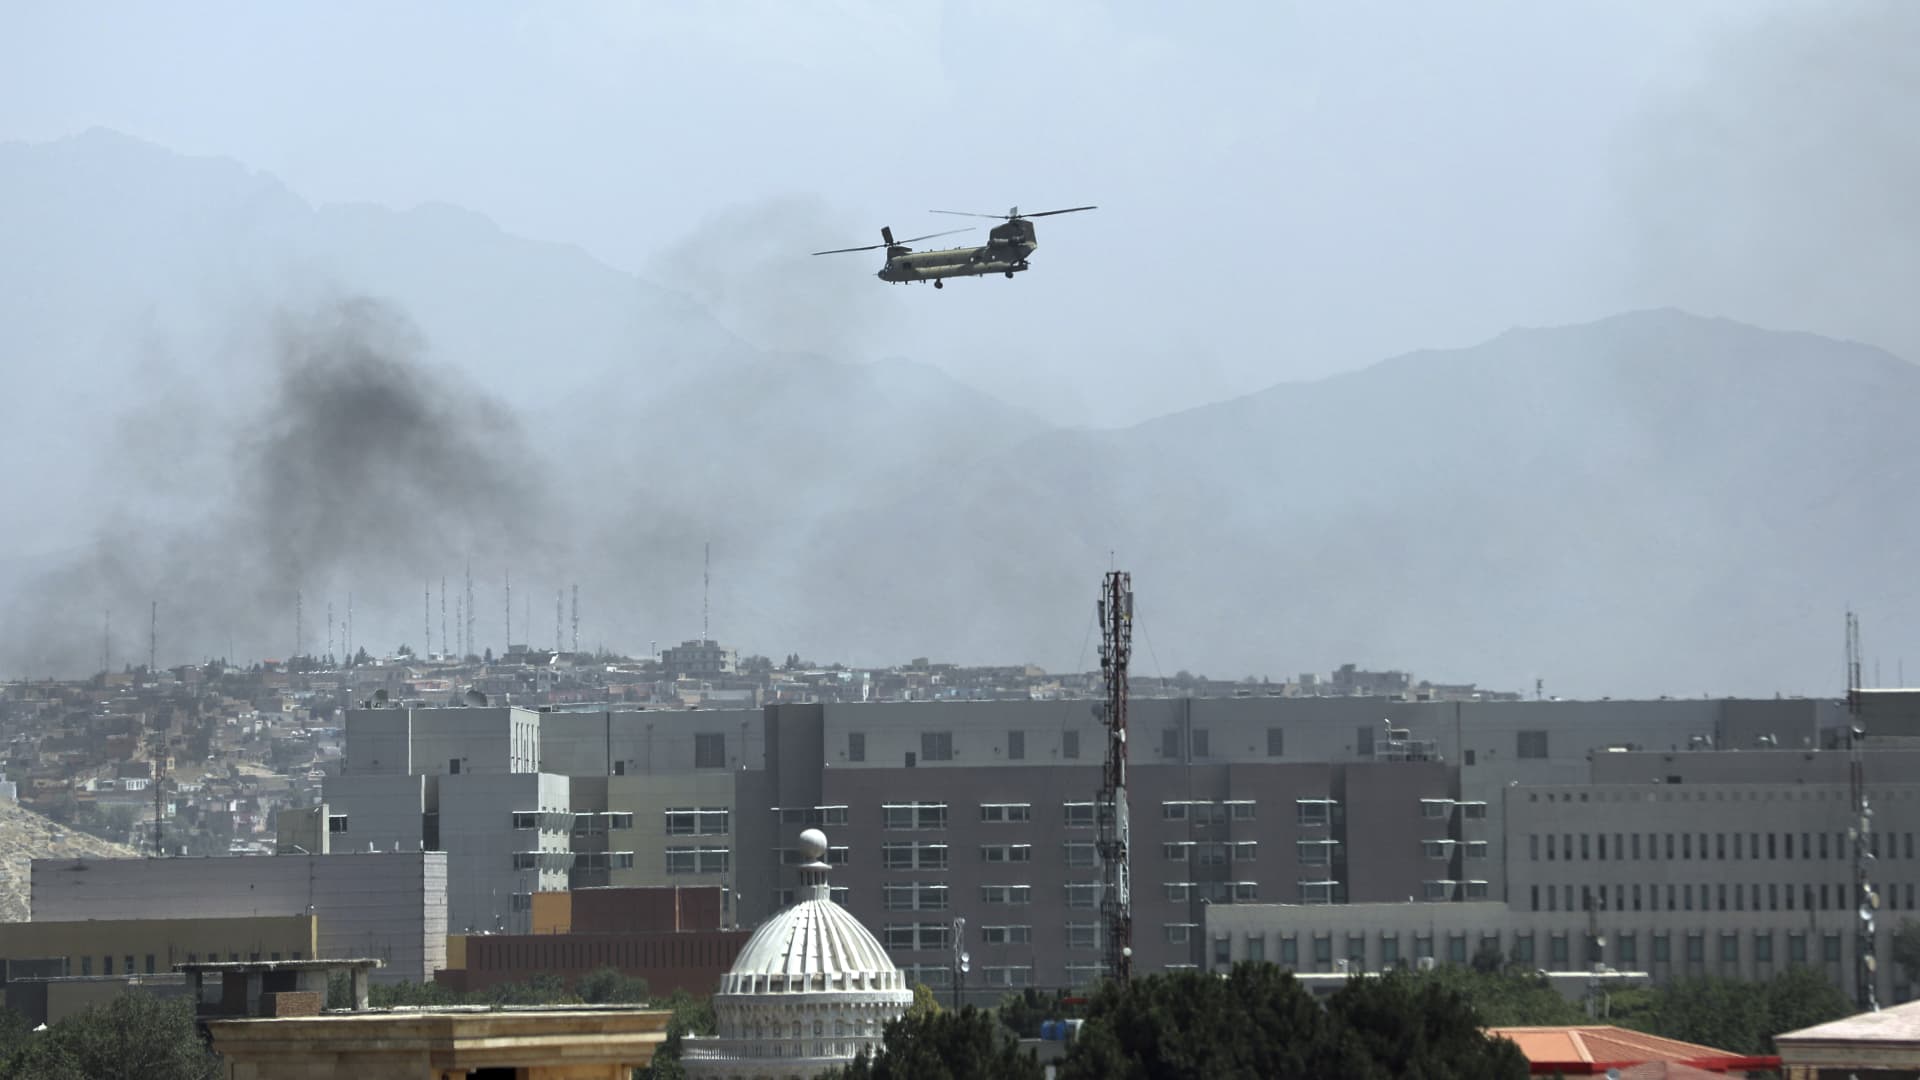 A U.S. Chinook helicopter flies over the city of Kabul, Afghanistan, Sunday, Aug. 15, 2021. Taliban fighters entered the outskirts of the Afghan capital on Sunday, further tightening their grip on the country as panicked workers fled government offices and helicopters landed at the U.S. Embassy.